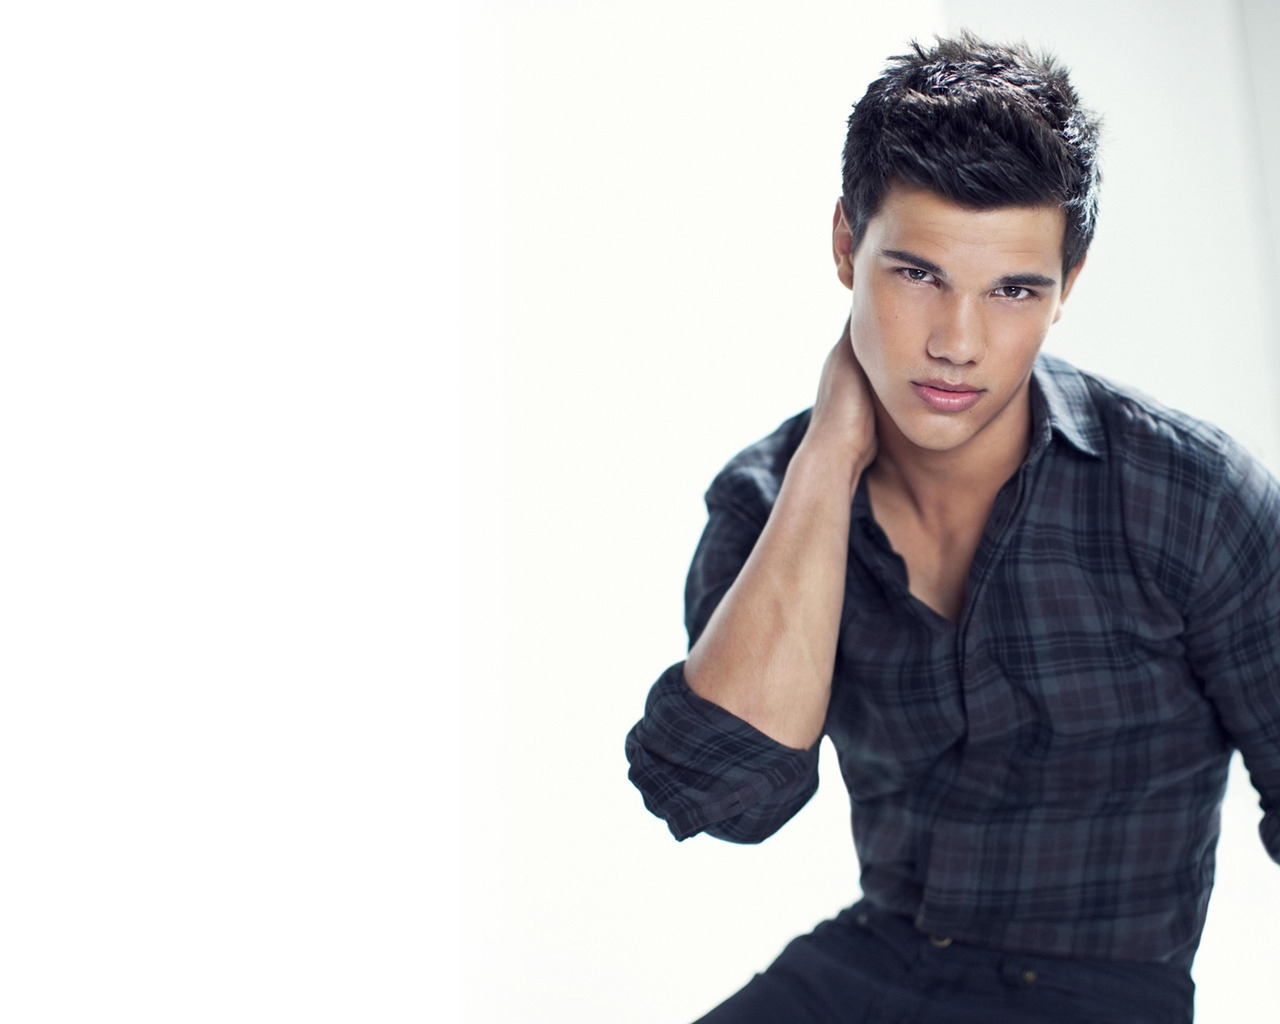 Taylor Lautner for 1280 x 1024 resolution